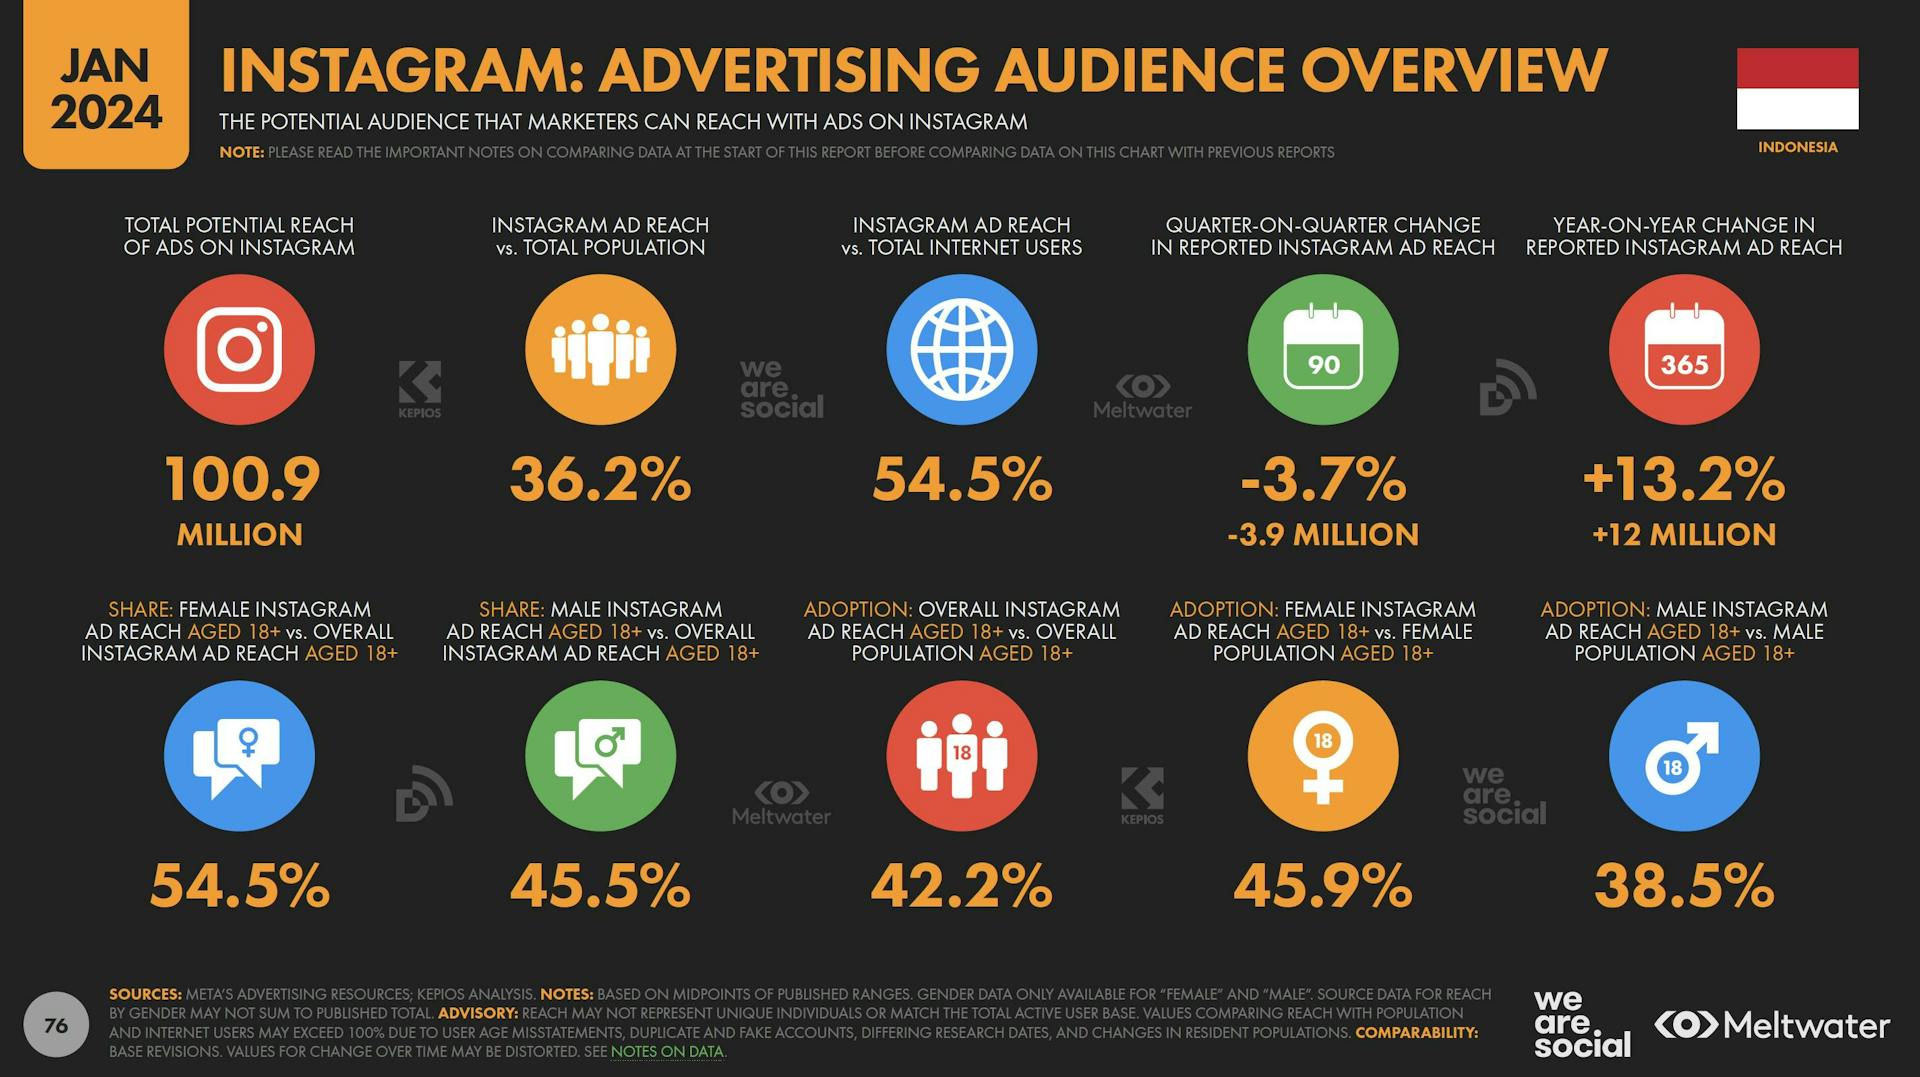 Advertising Audience Overview of Instagram based on Global Digital Report 2024 for Indonesia